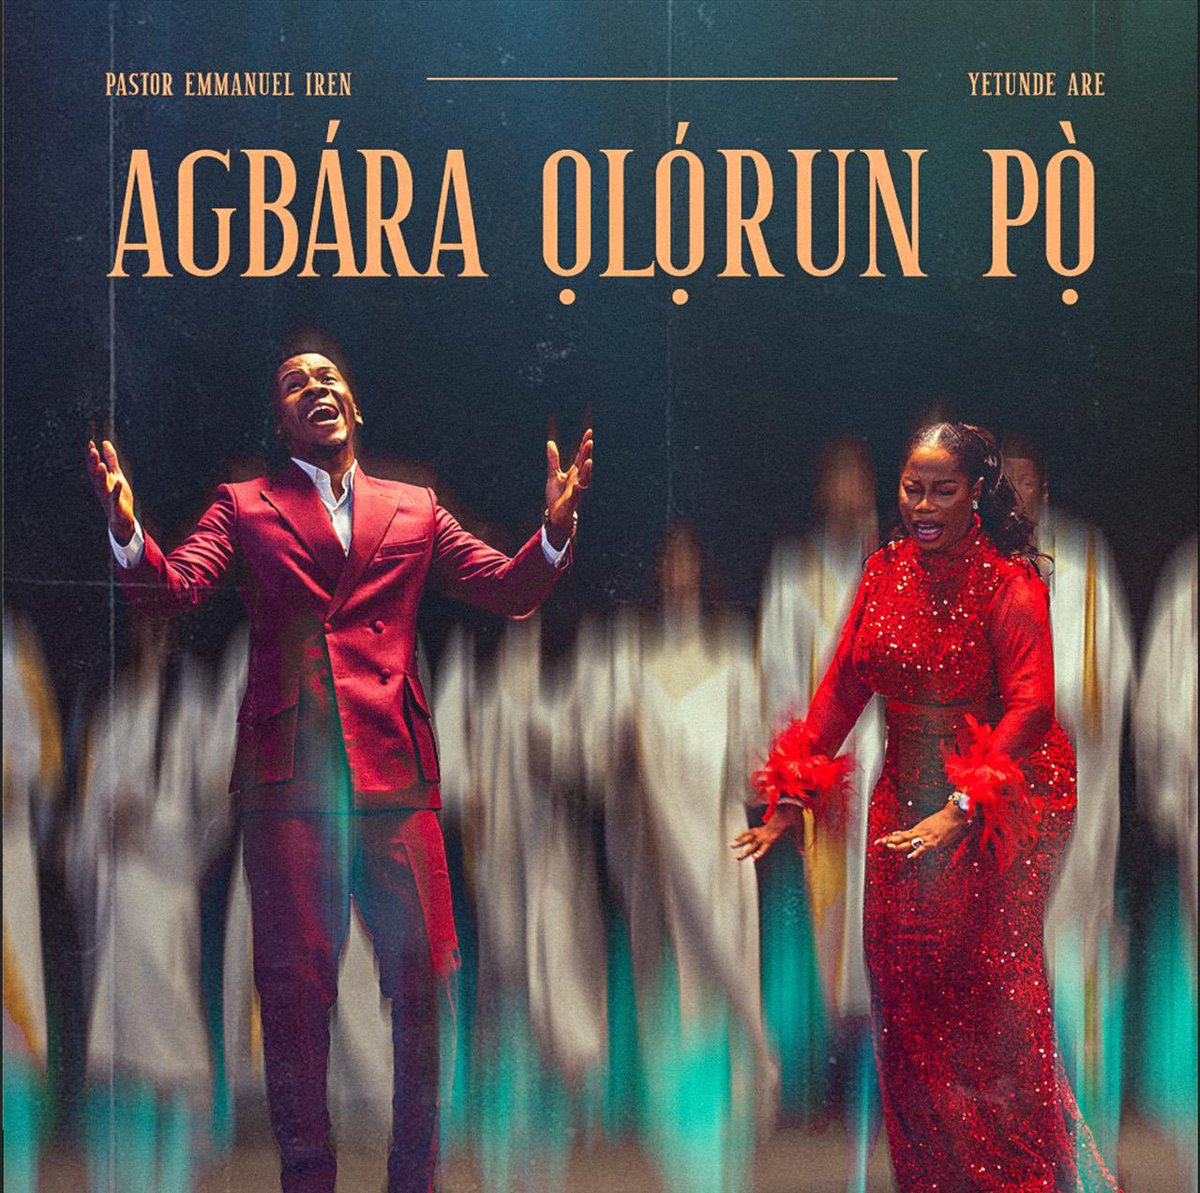 Tomorrow 🔥🔥 The “AGBARA OLORUN PO” Video by our Apostle @pst_iren ft @officialzionyetundeare drops 🥳🥳 This song will stir your spirits to new heights 🔥 Get ready! #AgbaraOlorunPo